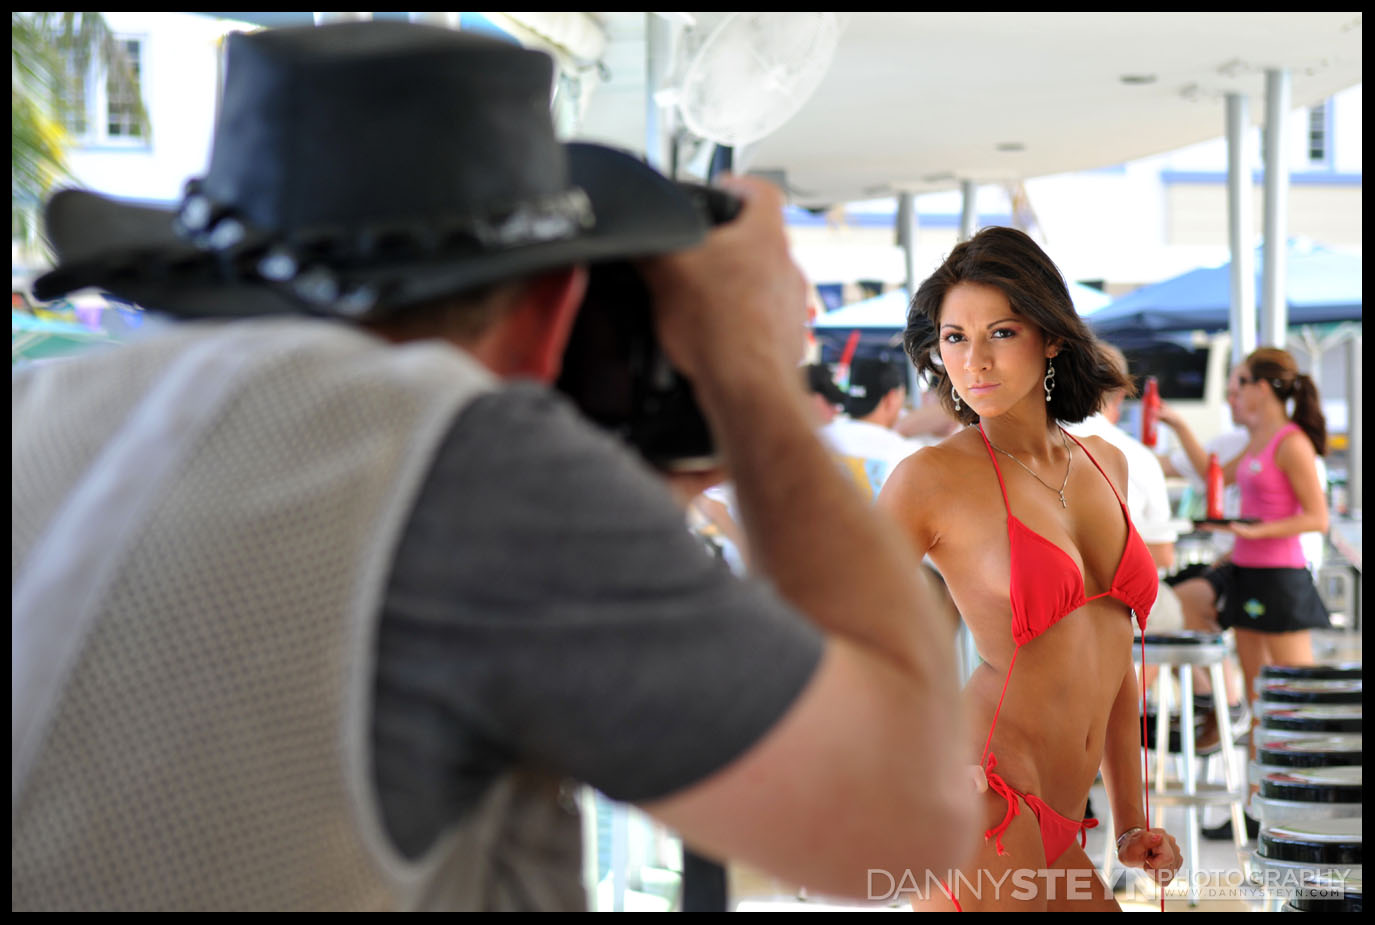 Calendar Photography - Behind the Scenes 